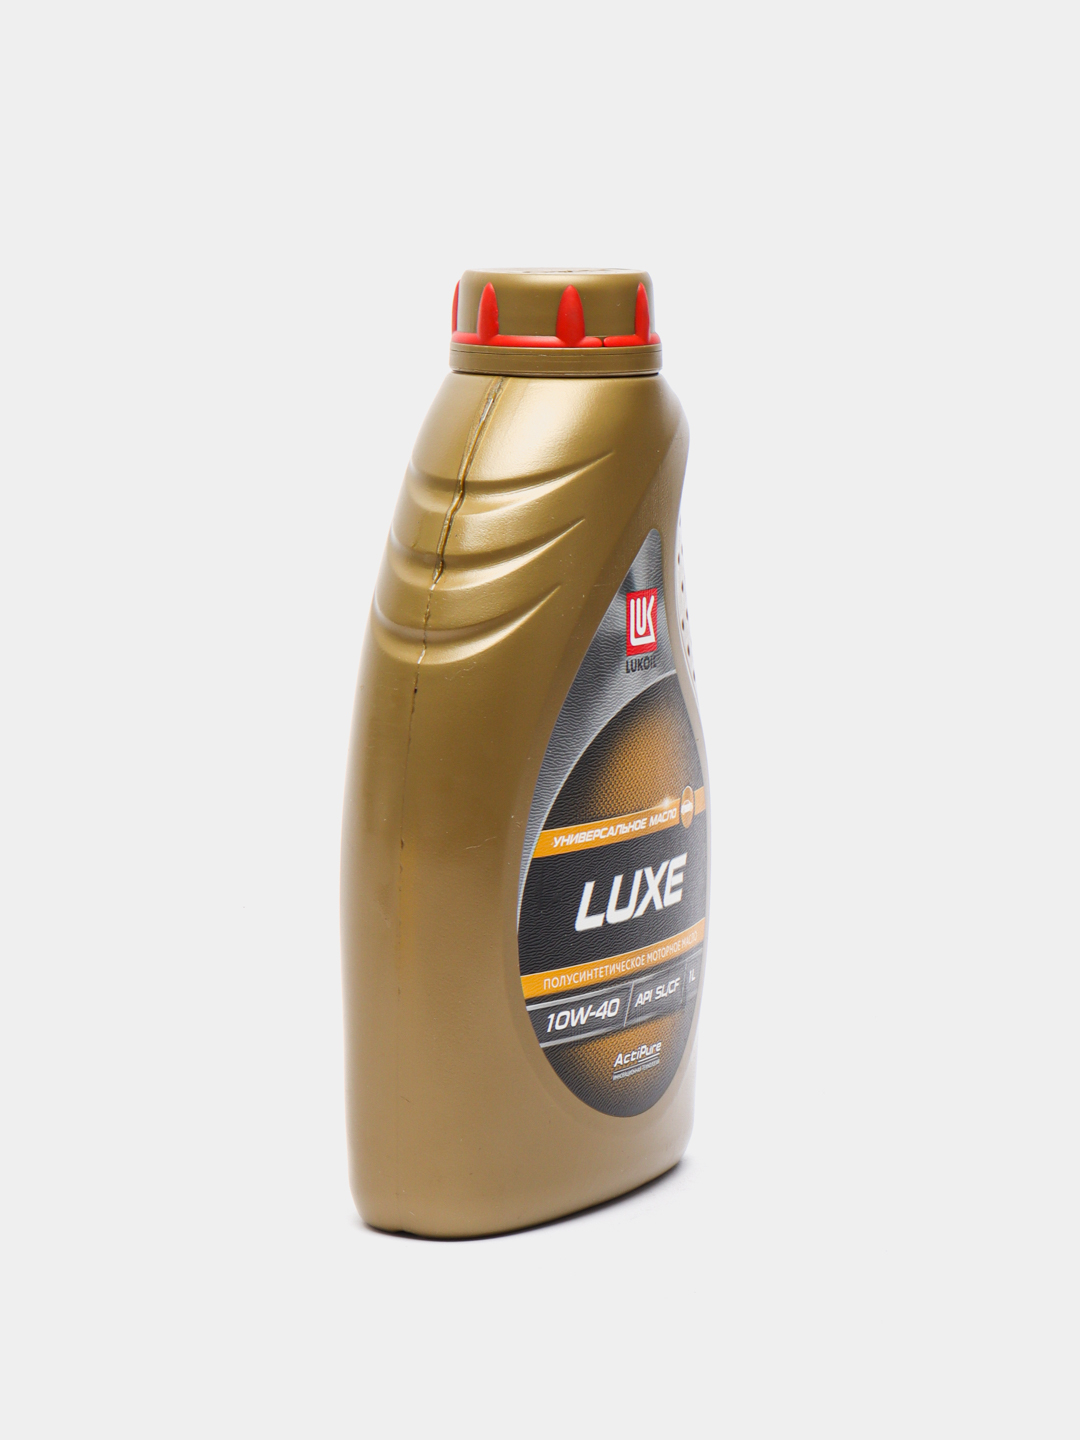 Моторное масло лукойл люкс 5w 40. Lukoil Luxe 10w-40. Лукойл Люкс 5w40 полусинтетика. Масло моторное Лукойл Люкс 5w40 полусинтетика. Масло Luxe 5w40 полусинтетика.